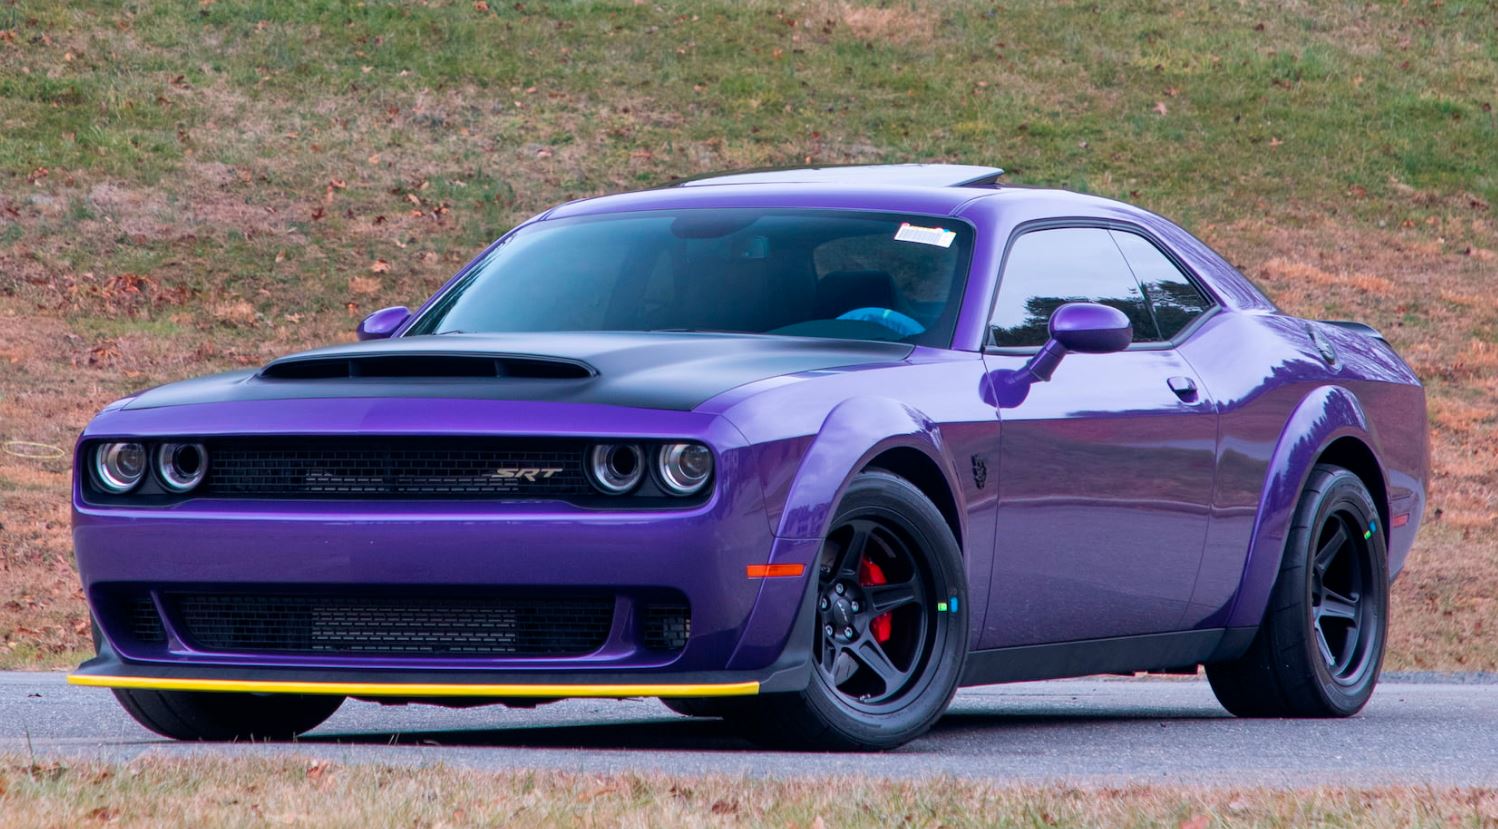 this-purple-2018-dodge-challenger-srt-demon-never-came-out-of-protective-plastic-144052_1-4263...jpg